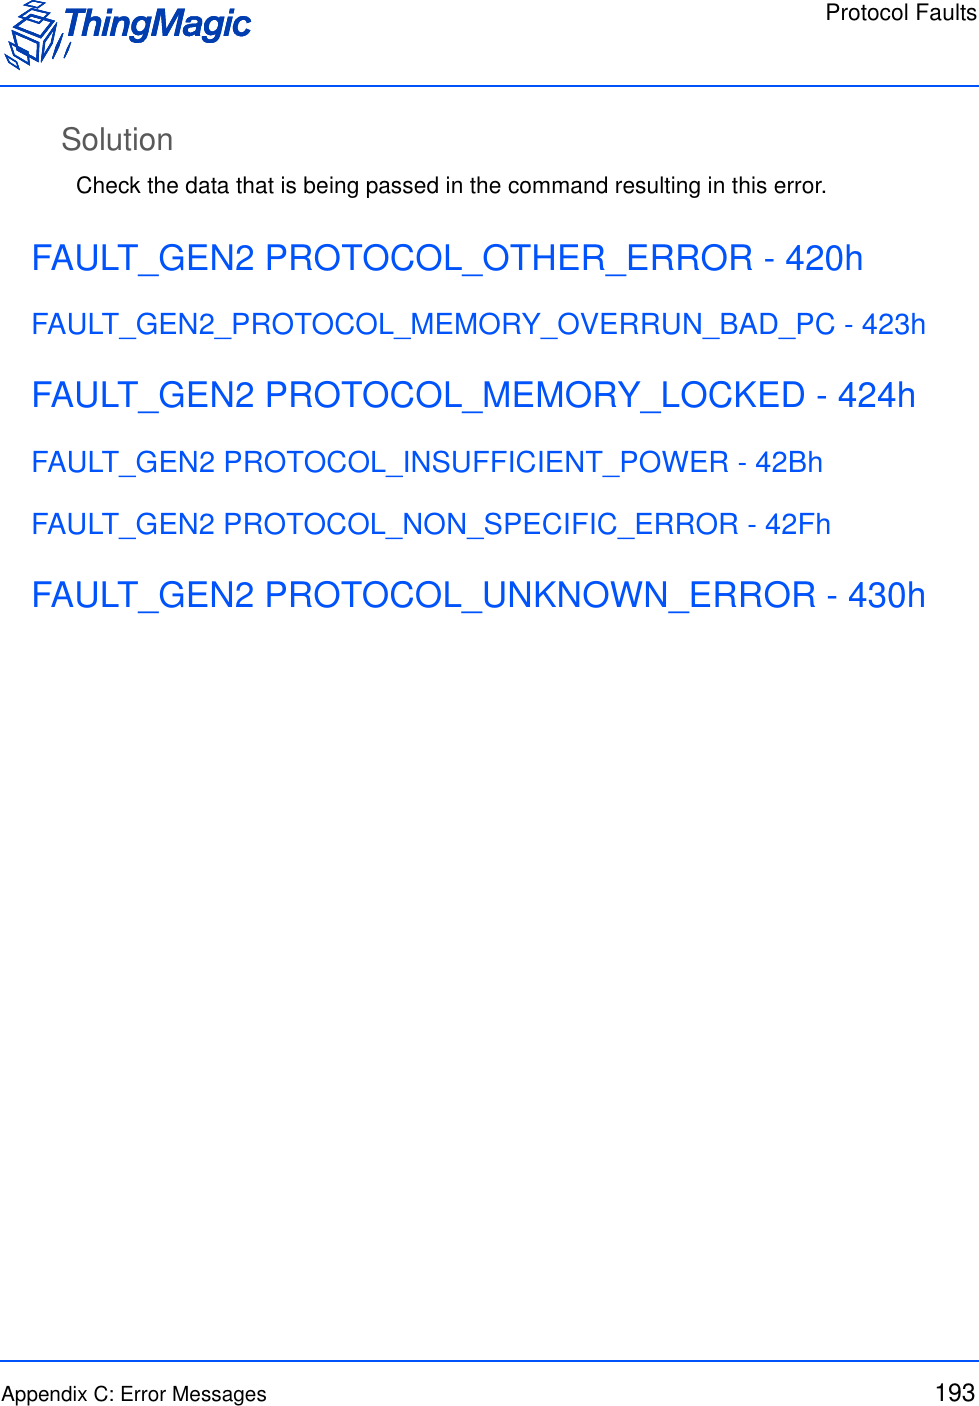 Protocol FaultsAppendix C: Error Messages 193SolutionCheck the data that is being passed in the command resulting in this error.FAULT_GEN2 PROTOCOL_OTHER_ERROR - 420hFAULT_GEN2_PROTOCOL_MEMORY_OVERRUN_BAD_PC - 423hFAULT_GEN2 PROTOCOL_MEMORY_LOCKED - 424hFAULT_GEN2 PROTOCOL_INSUFFICIENT_POWER - 42BhFAULT_GEN2 PROTOCOL_NON_SPECIFIC_ERROR - 42FhFAULT_GEN2 PROTOCOL_UNKNOWN_ERROR - 430h